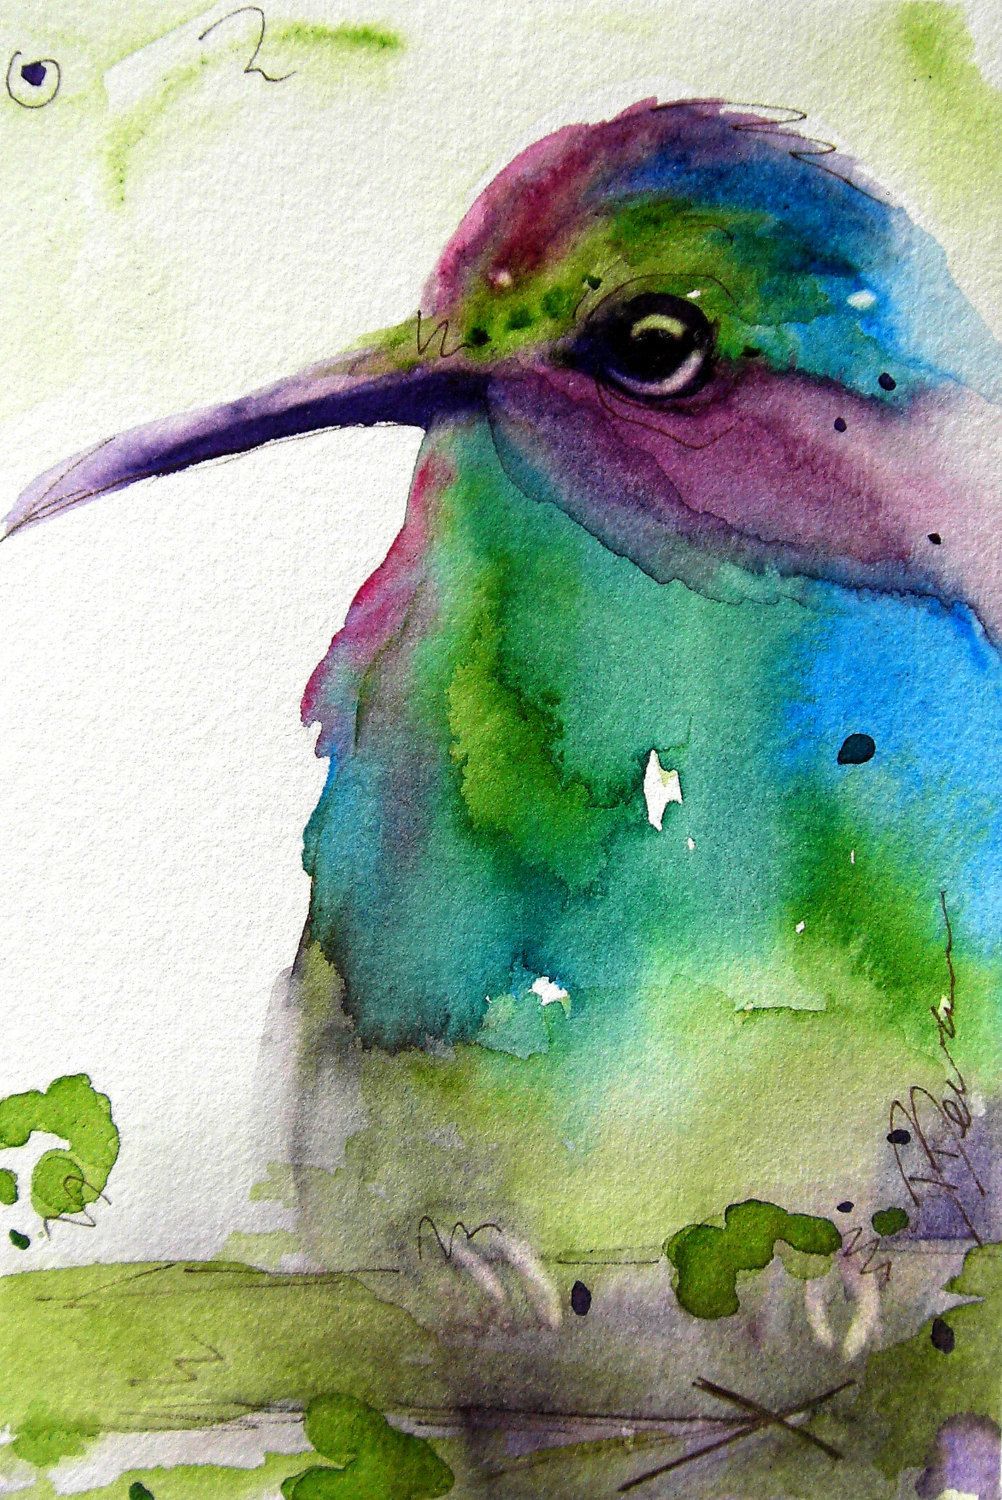 Etsy Watercolor Paintings | Hummingbird Watercolor Art Print by RedbirdCottageArt on Etsy